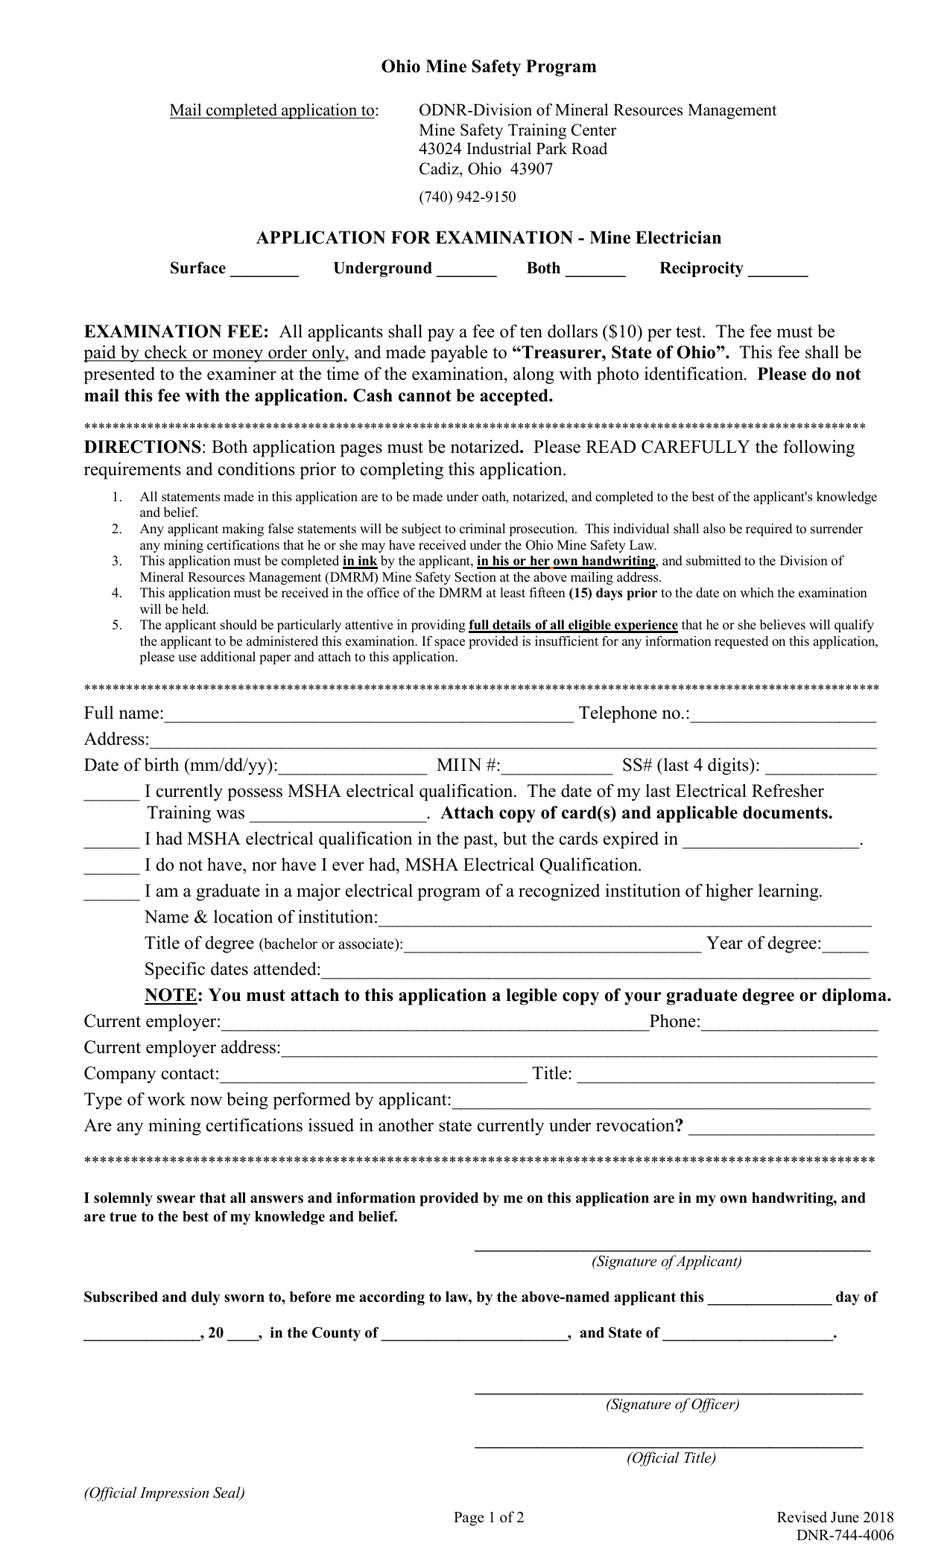 Form DNR-744-4006 Application for Examination - Mine Electrician - Ohio, Page 1